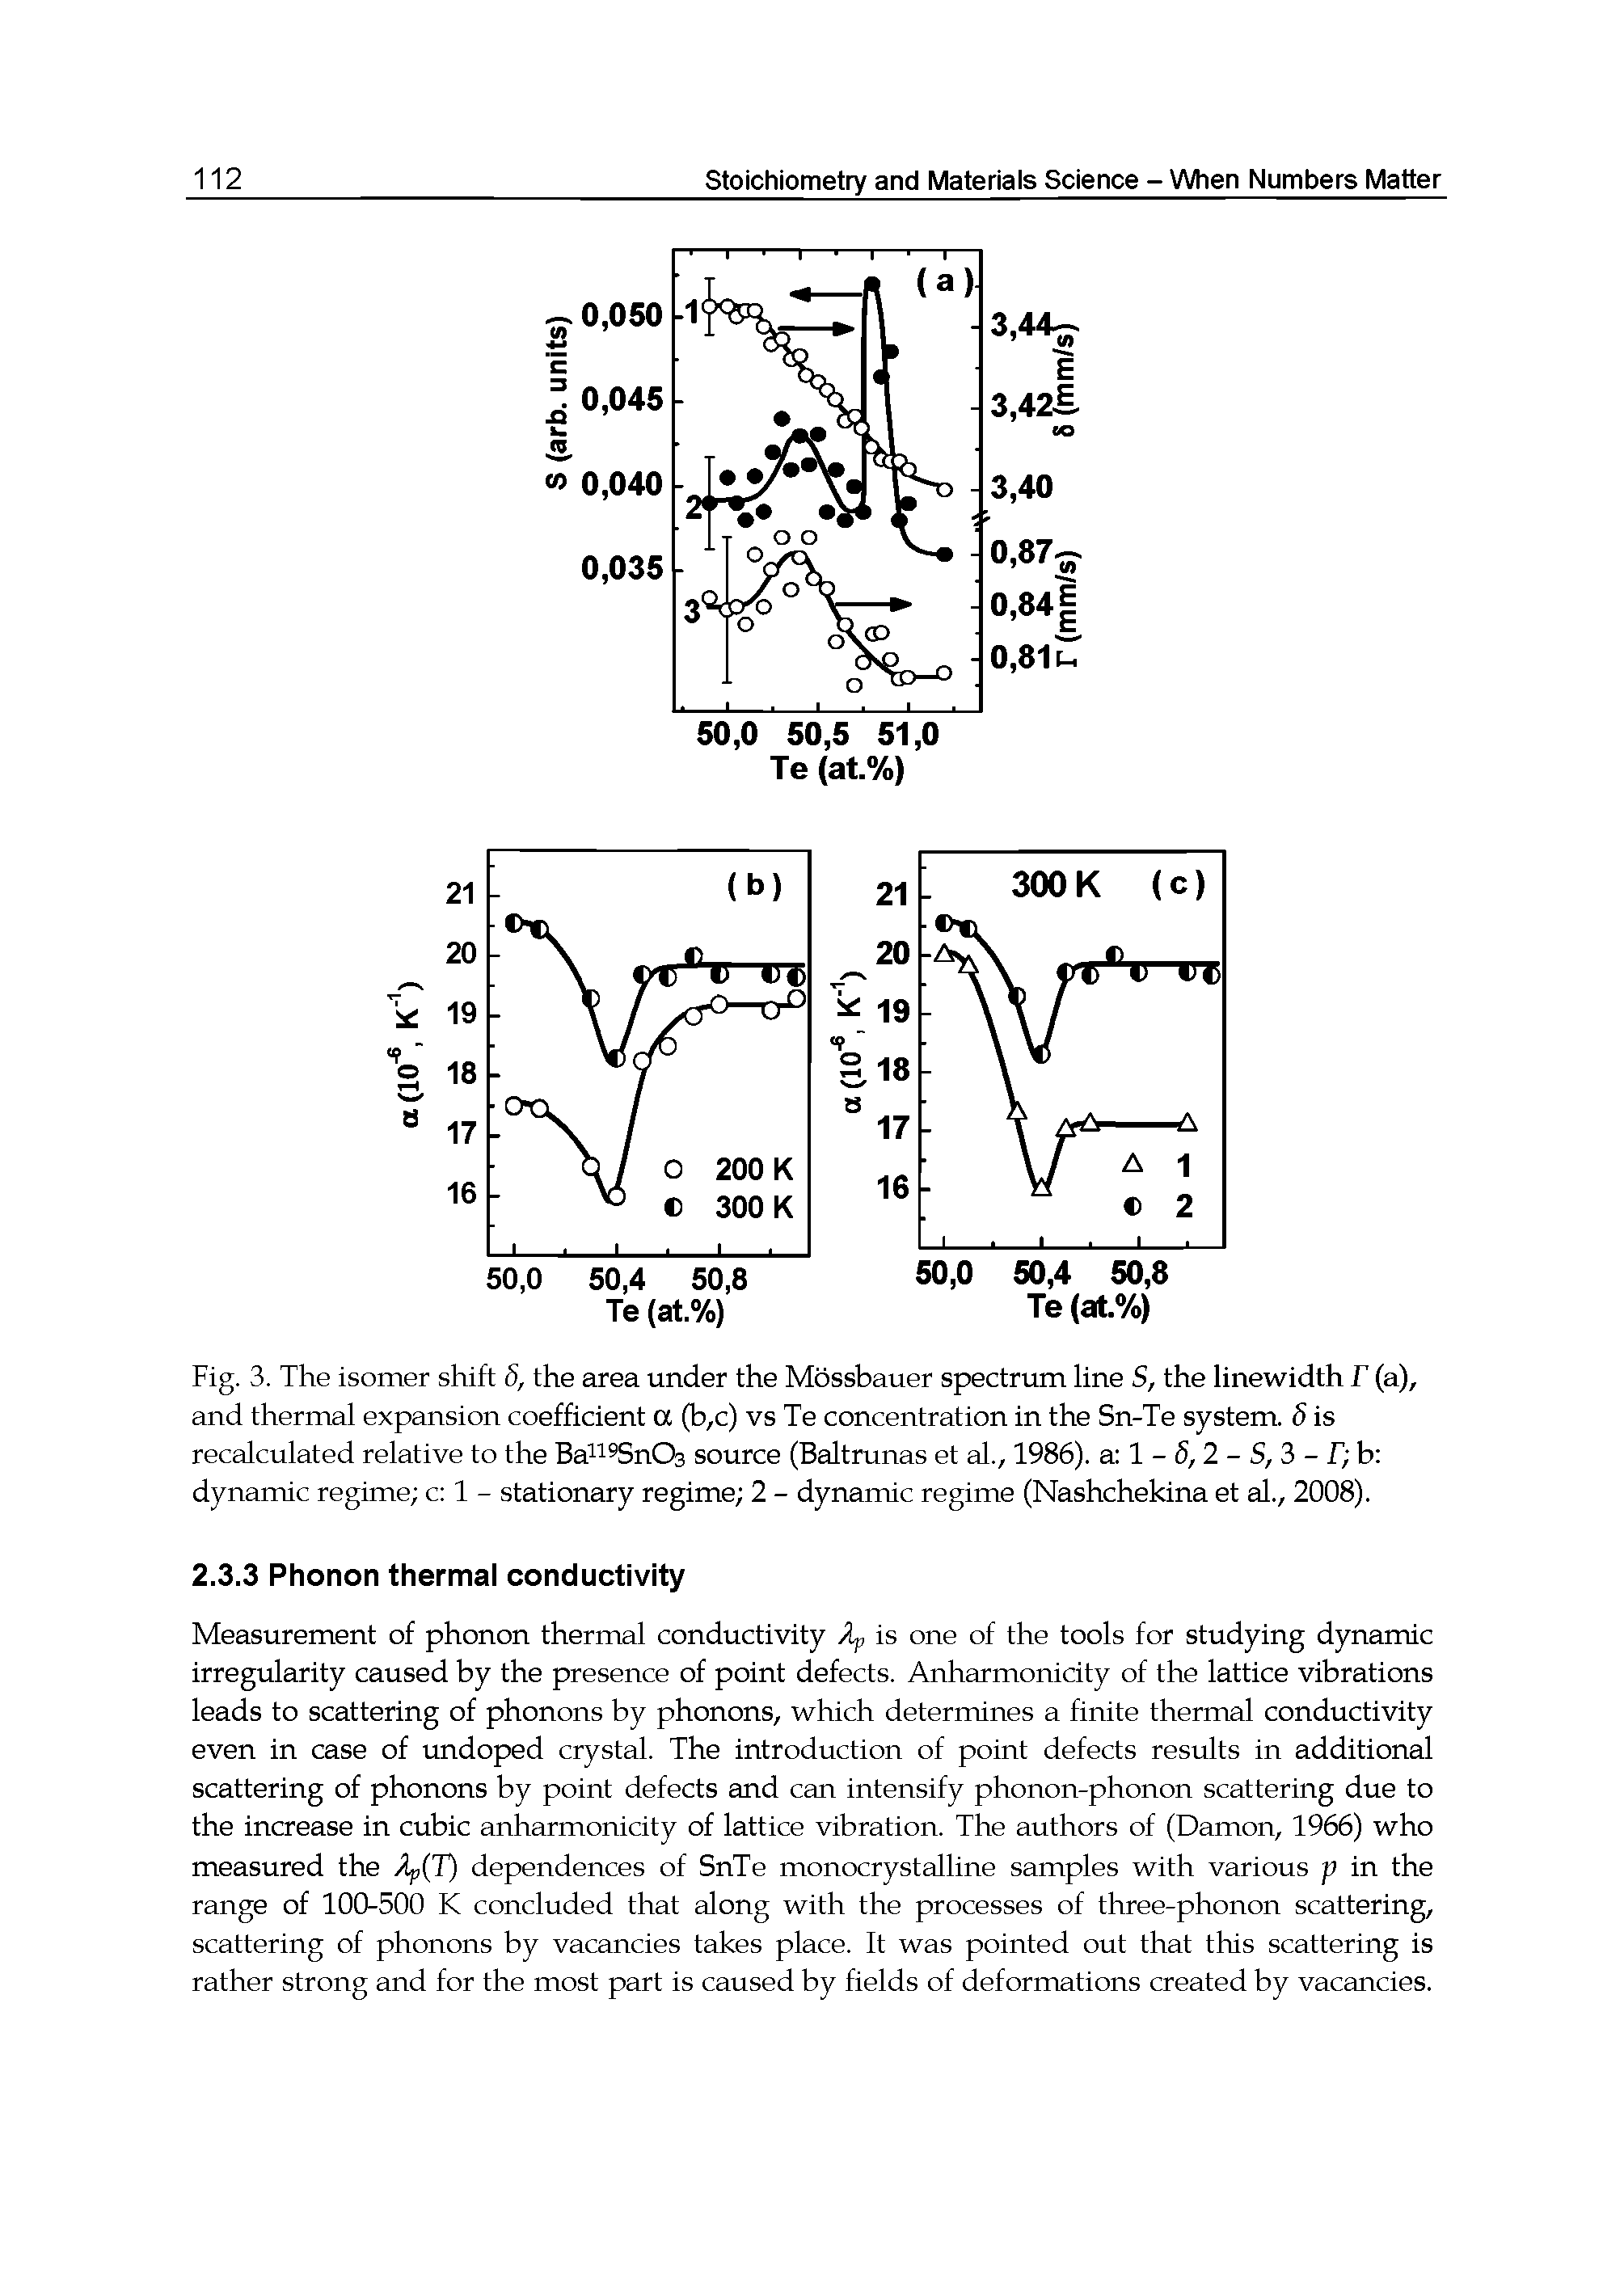 Fig. 3. The isomer shift 6, the area under the Mossbauer spectrum line S, the linewidth T (a), and thermal expansion coefficient a (b,c) vs Te concentration in the Sn-Te system 6 is recalculated relative to the BaH nQs source (Baltrunas et al., 1986). a 1 - 5,2 - S, 3 - T b dynamic regime c 1 - stationary regime 2 - dynamic regime (Nashchekina et al., 2008).